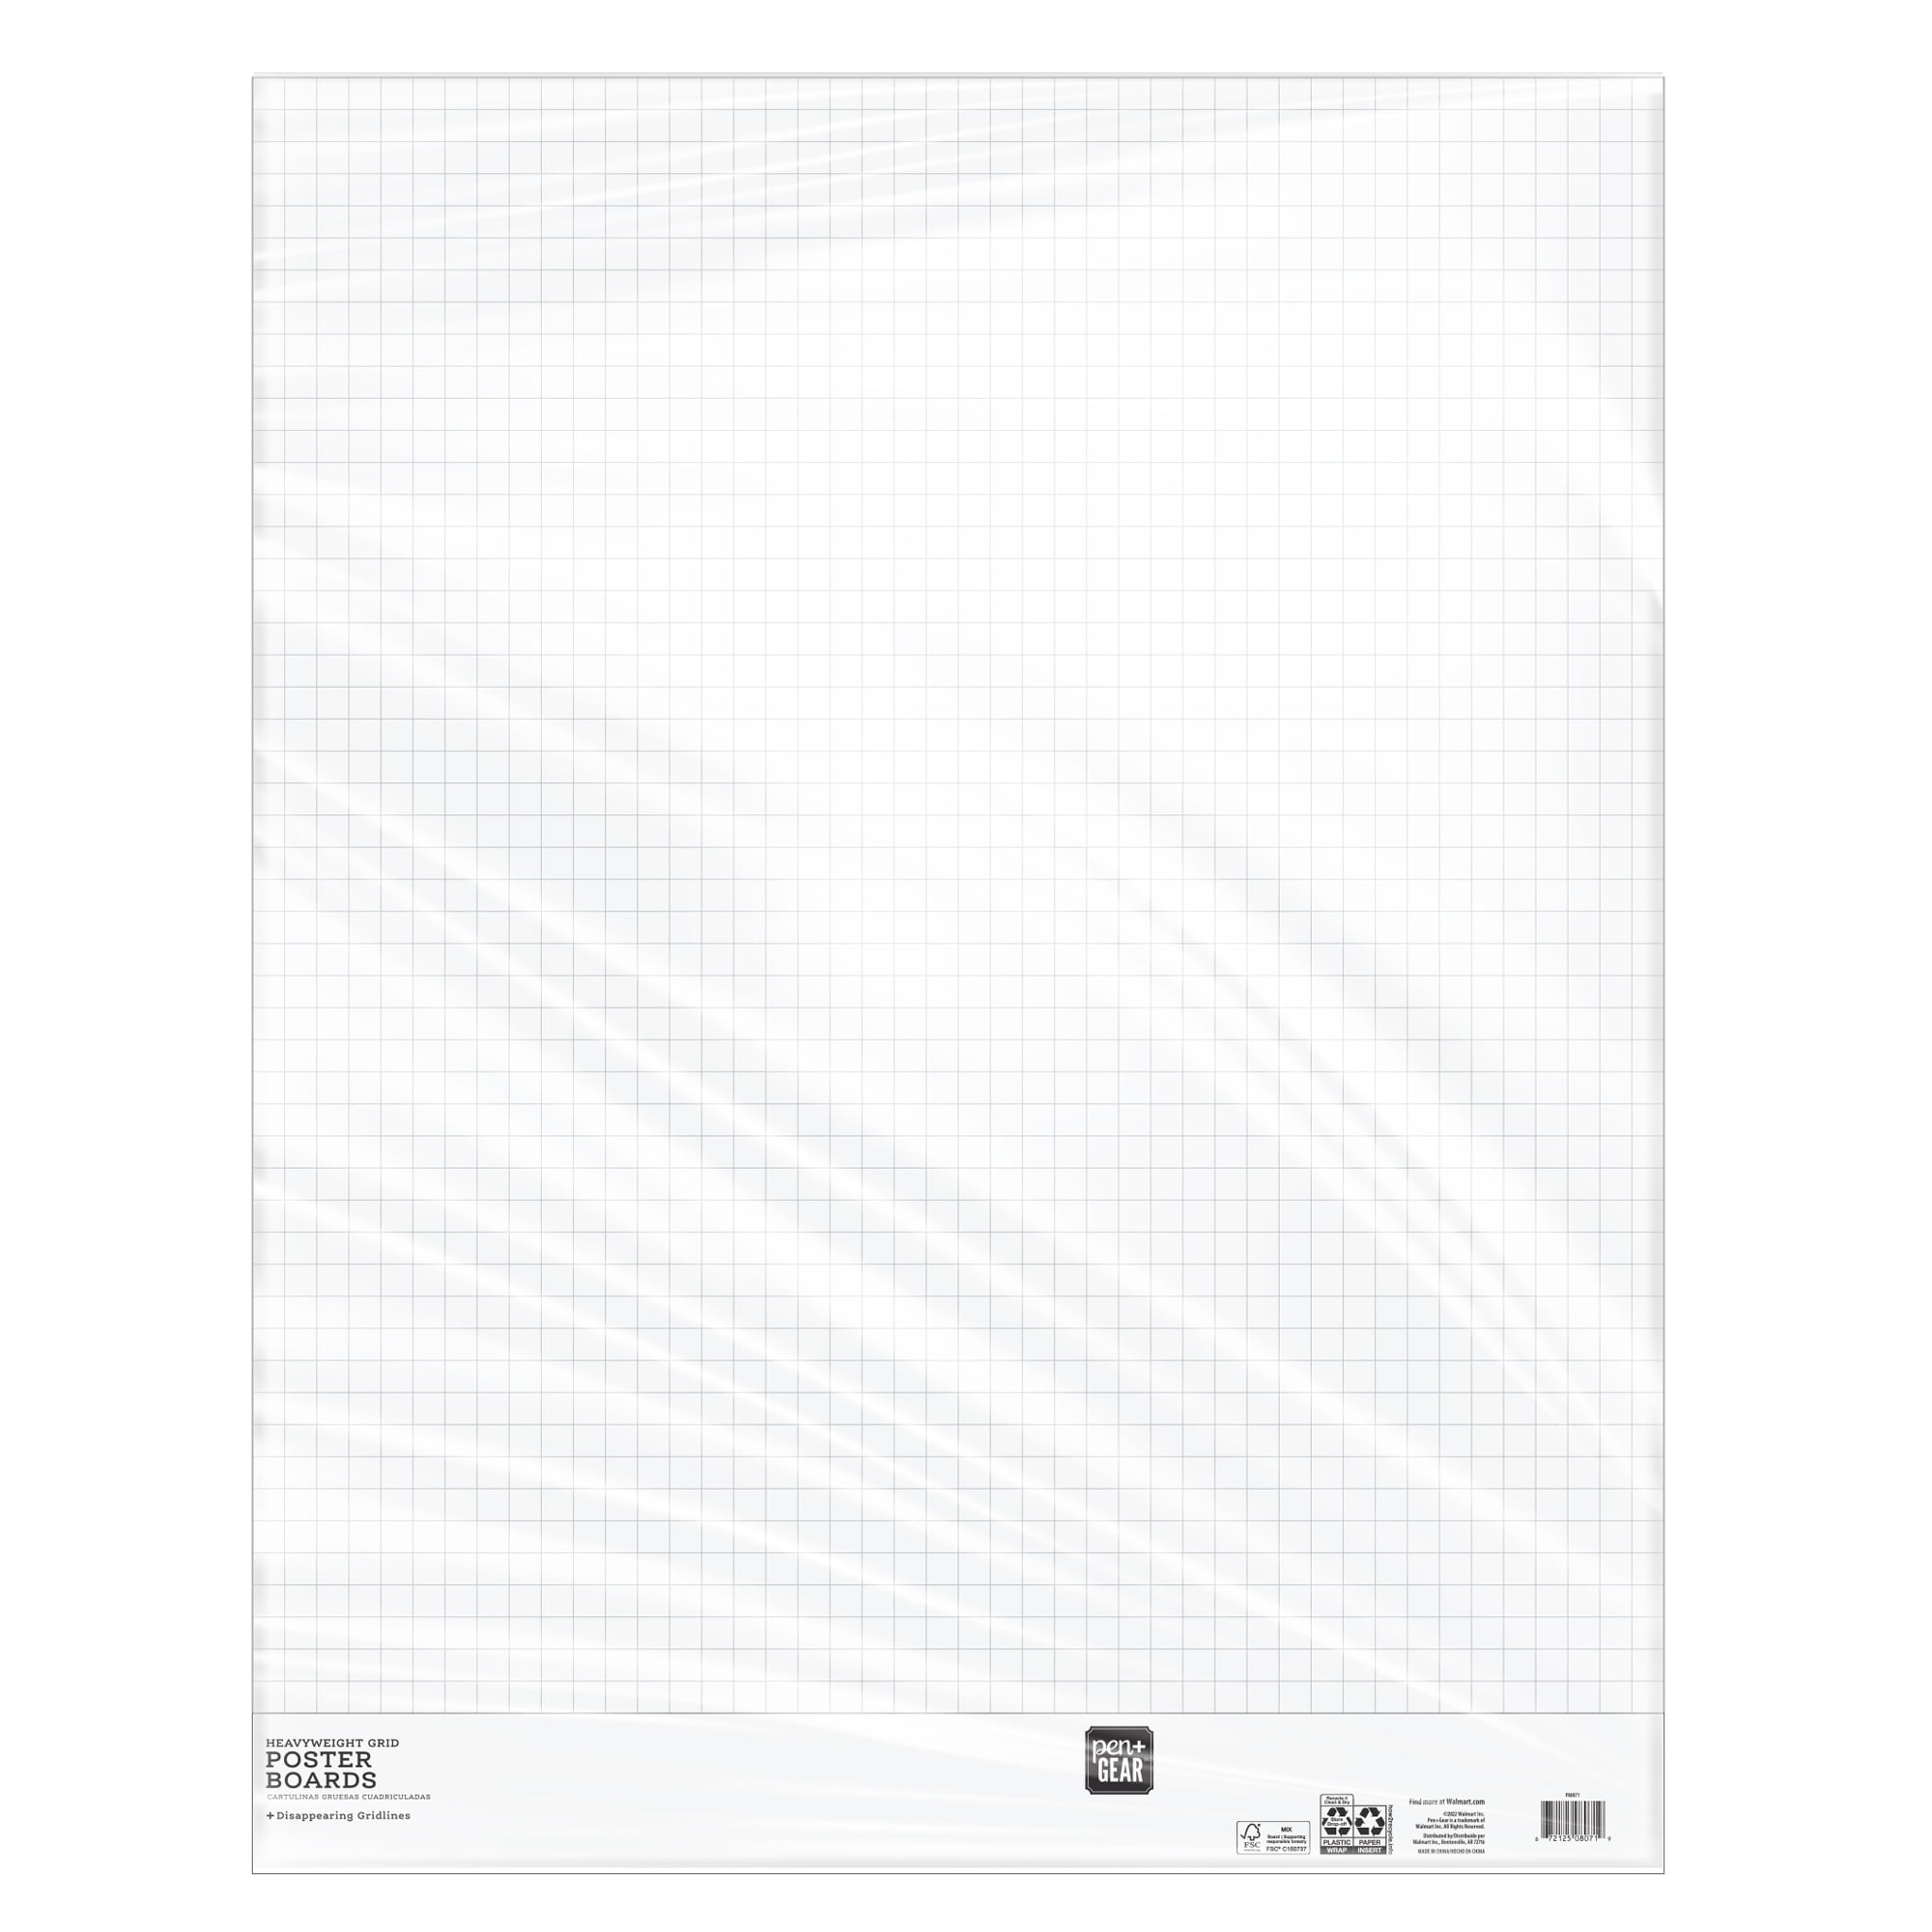 Poster Board, 22 x 28, White, Pack Of 10 - Zerbee